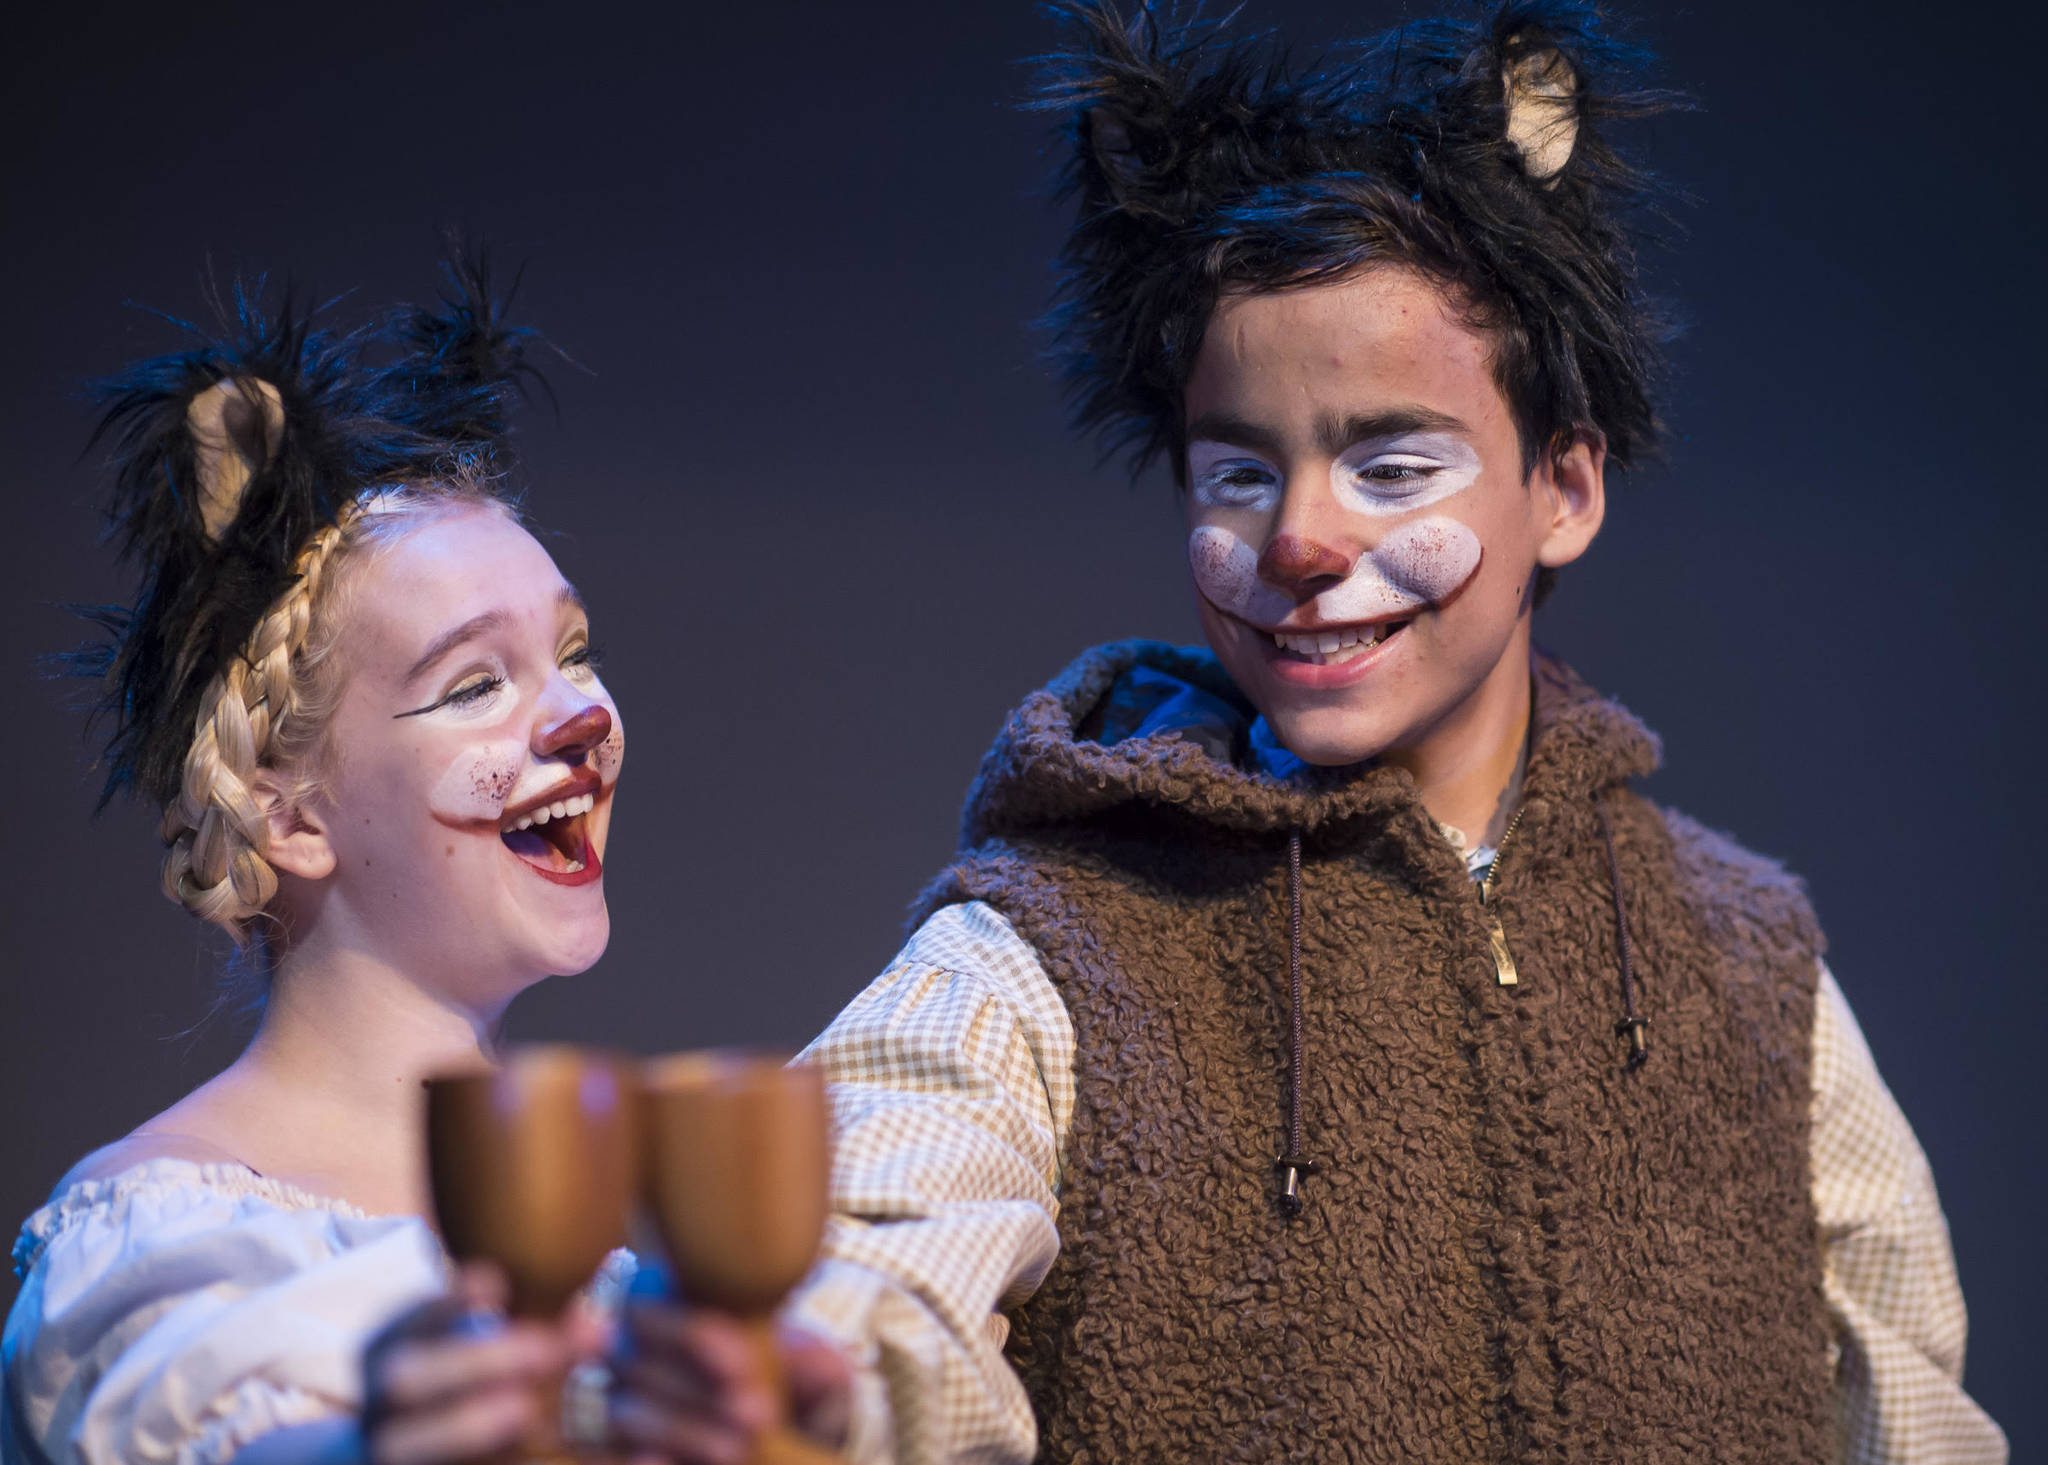 Olivia Bolin, left, and Tony Rivera rehearse in the Thunder Mountain High School production of “The Lion, the Witch and the Wardrobe” at TMHS on Friday, Sept. 28, 2018. (Michael Penn | Juneau Empire)